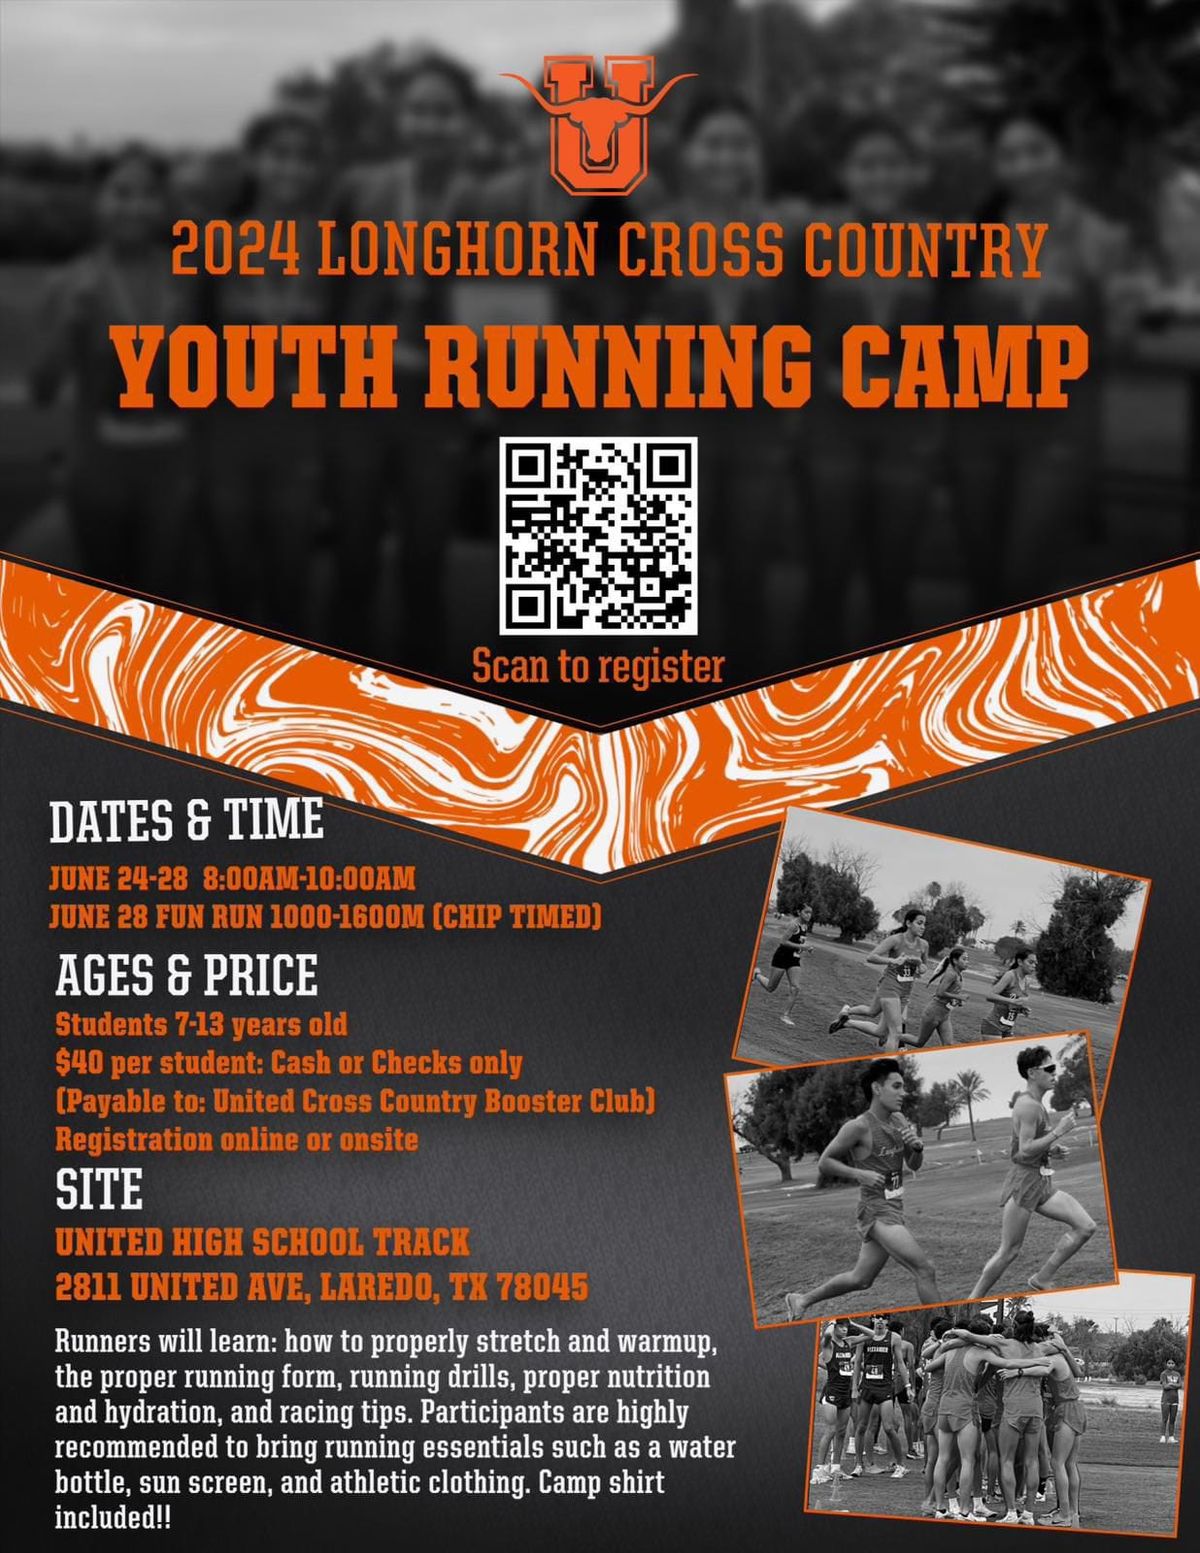 YOUTH RUNNING CAMP